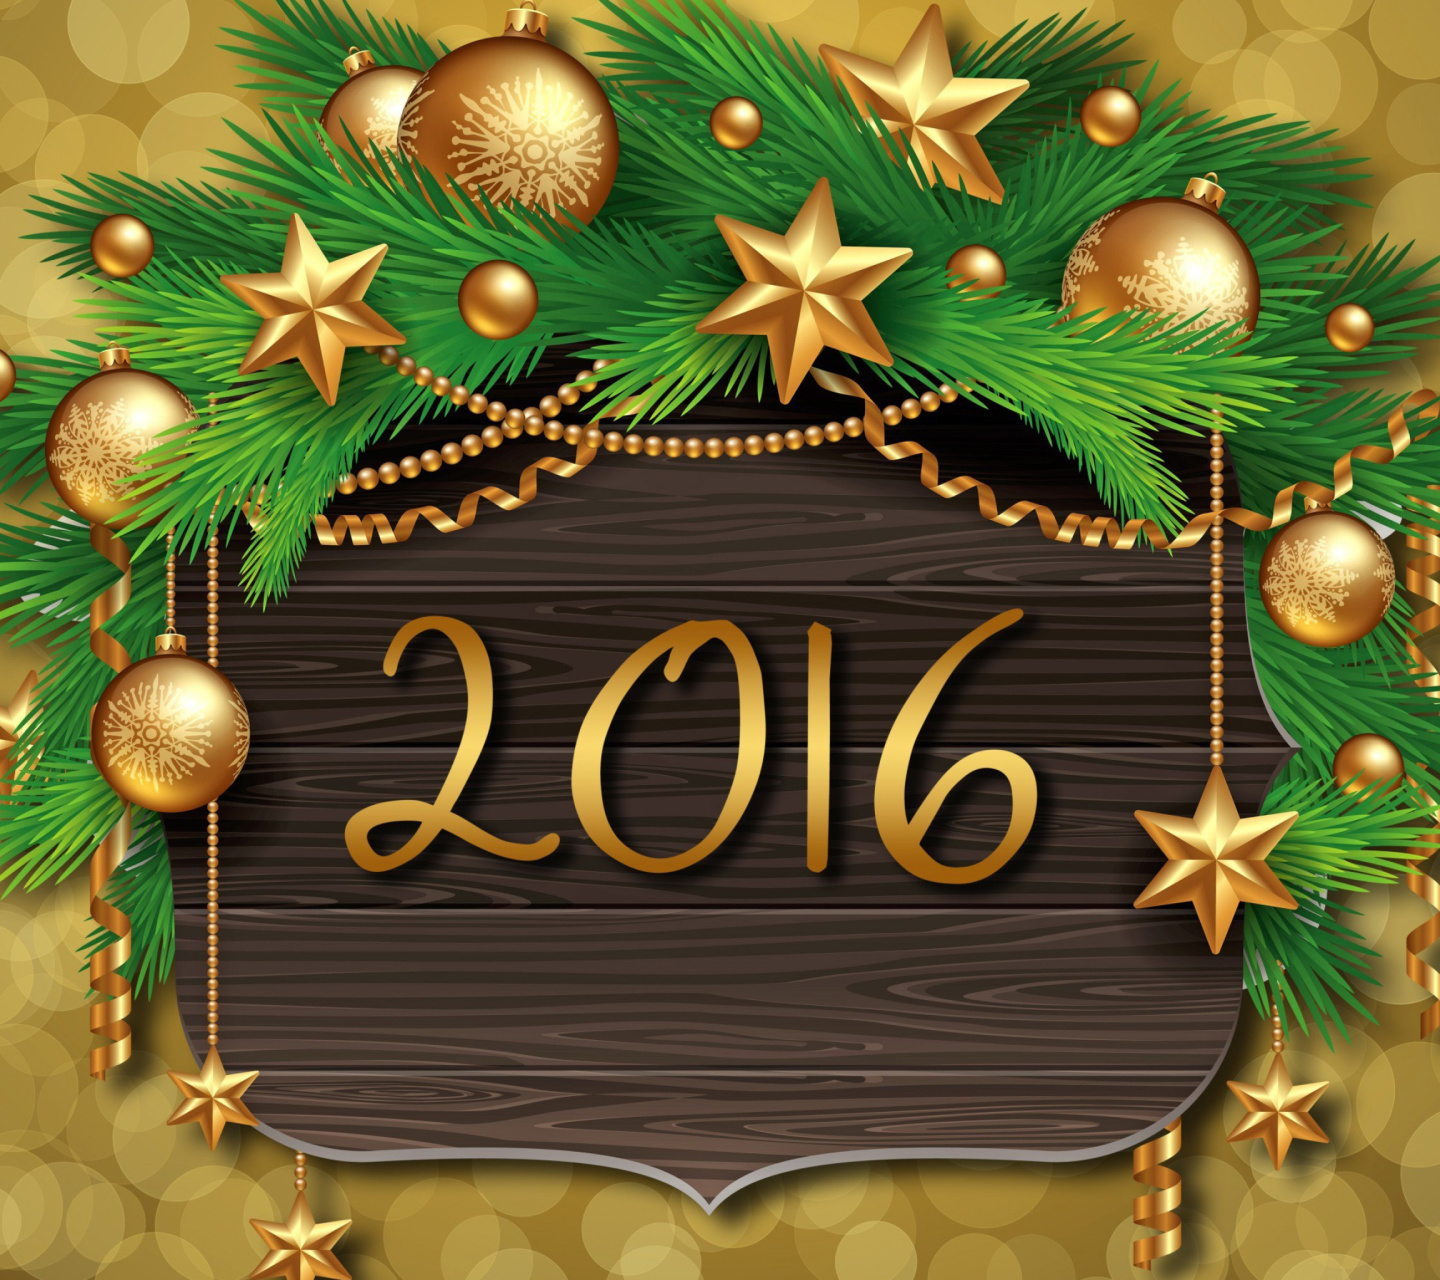 Happy New Year 2016 Golden Style wallpaper 1440x1280